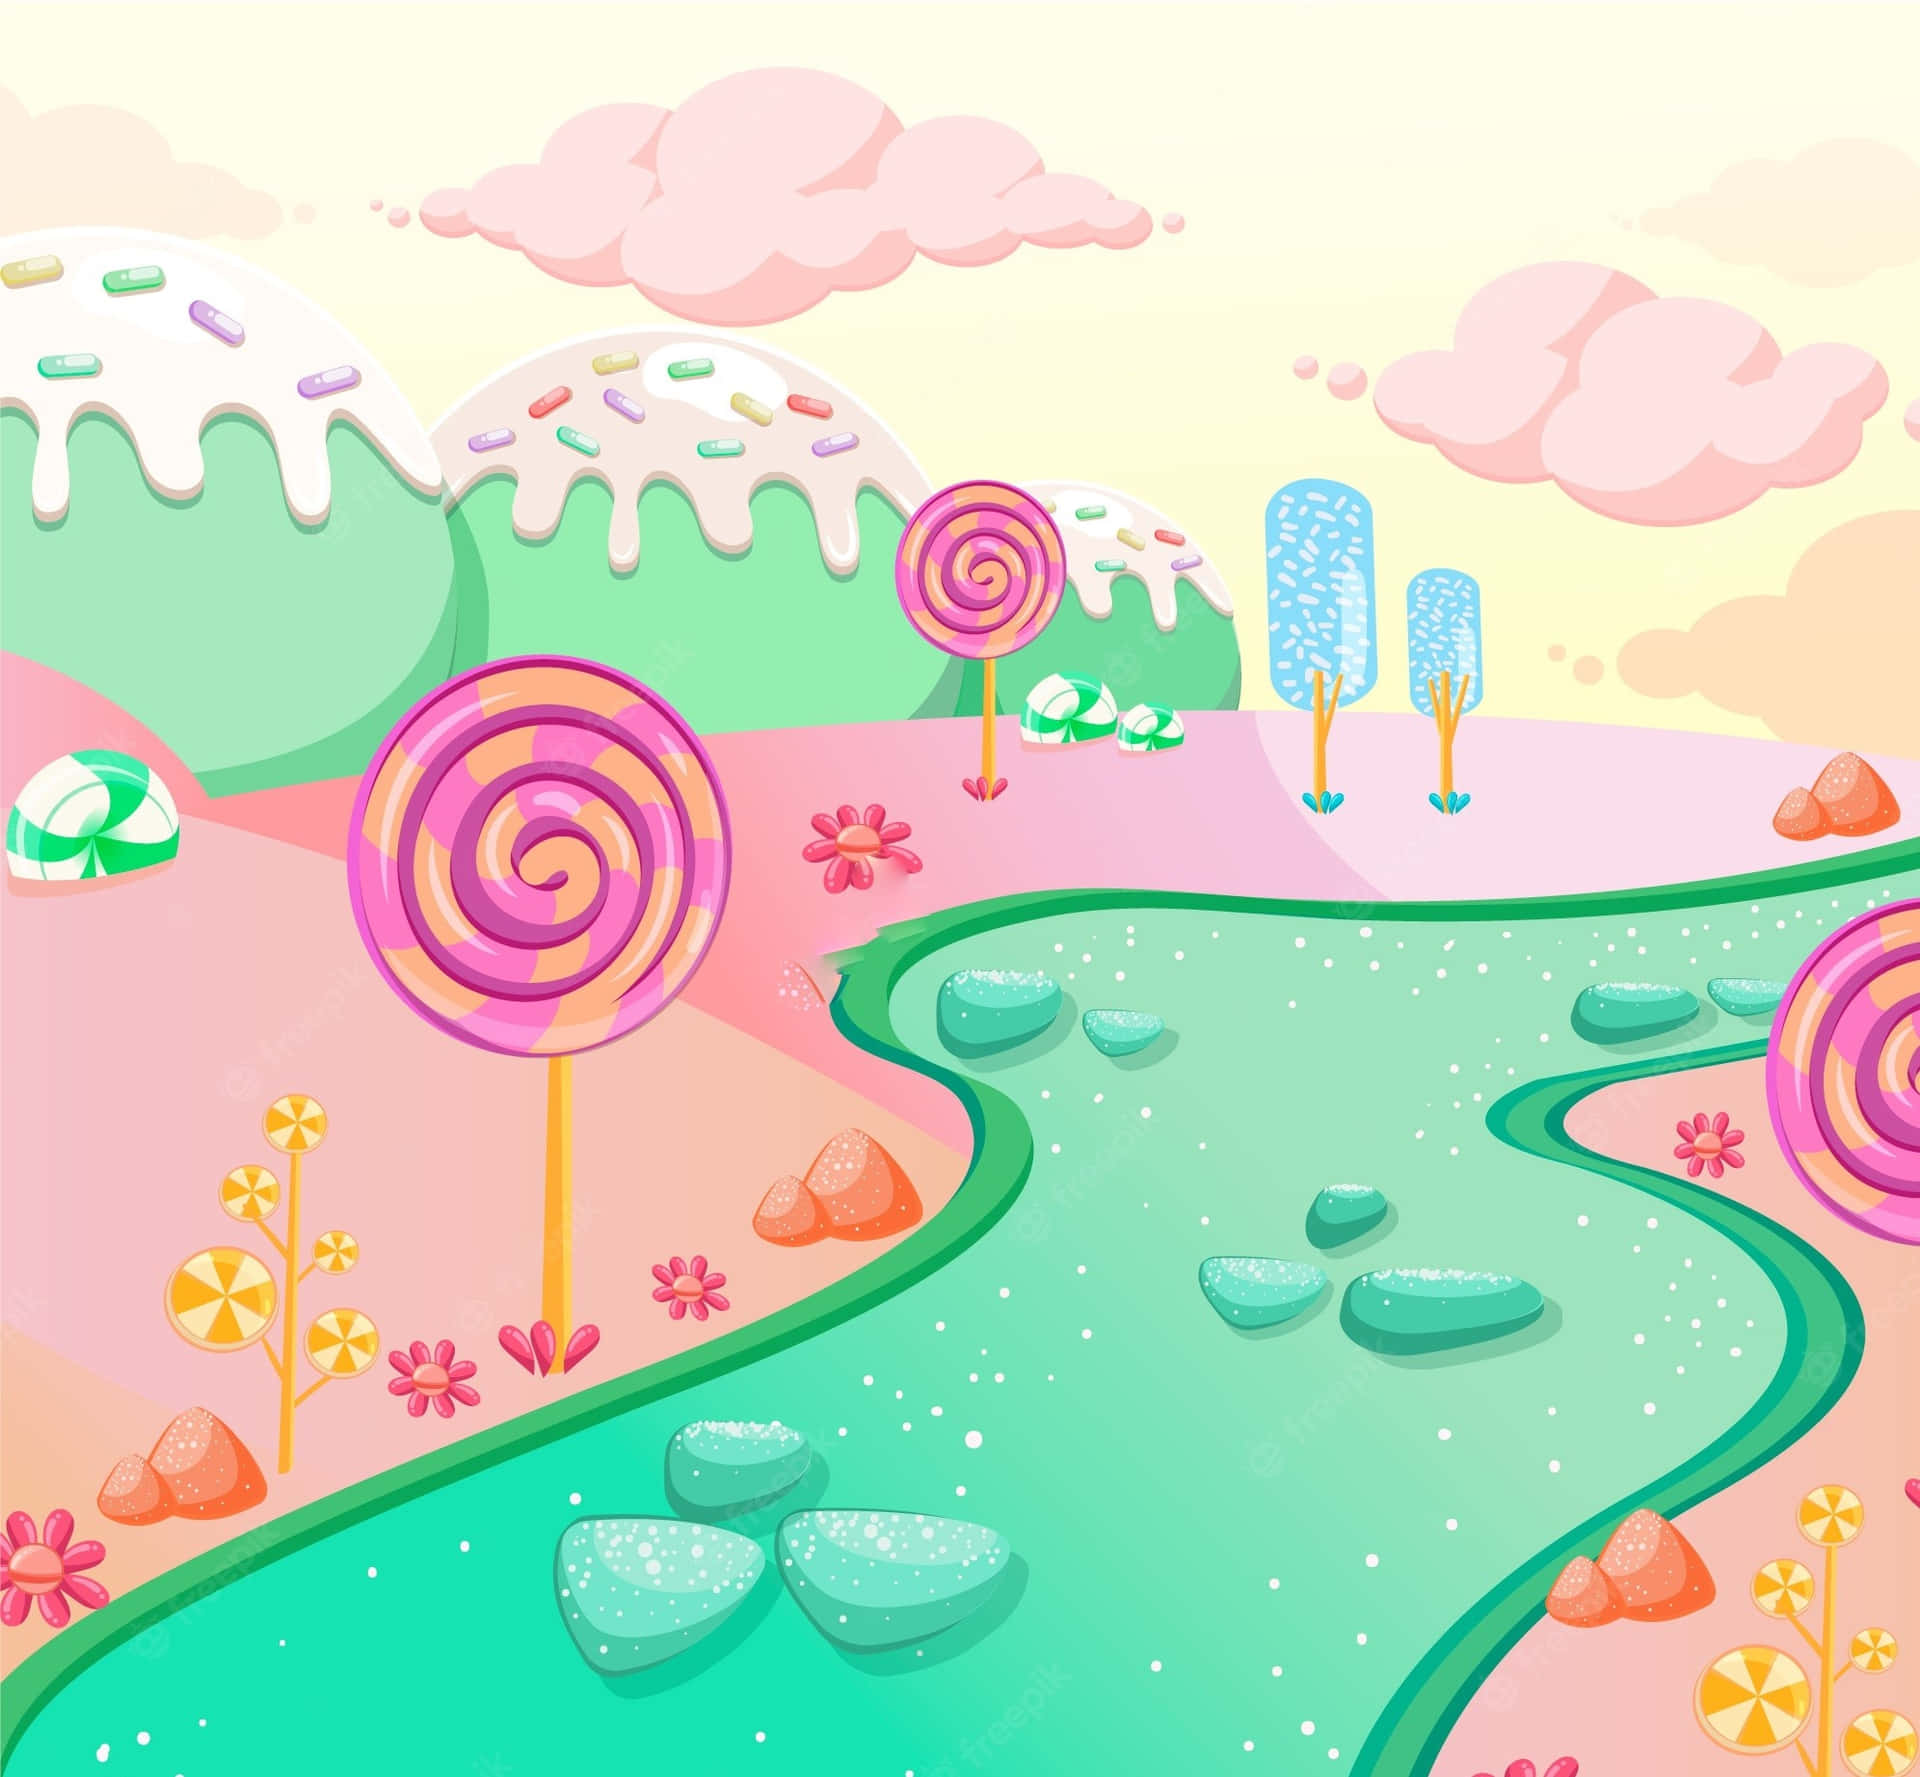 A Cartoon Landscape With Lollipops And A River